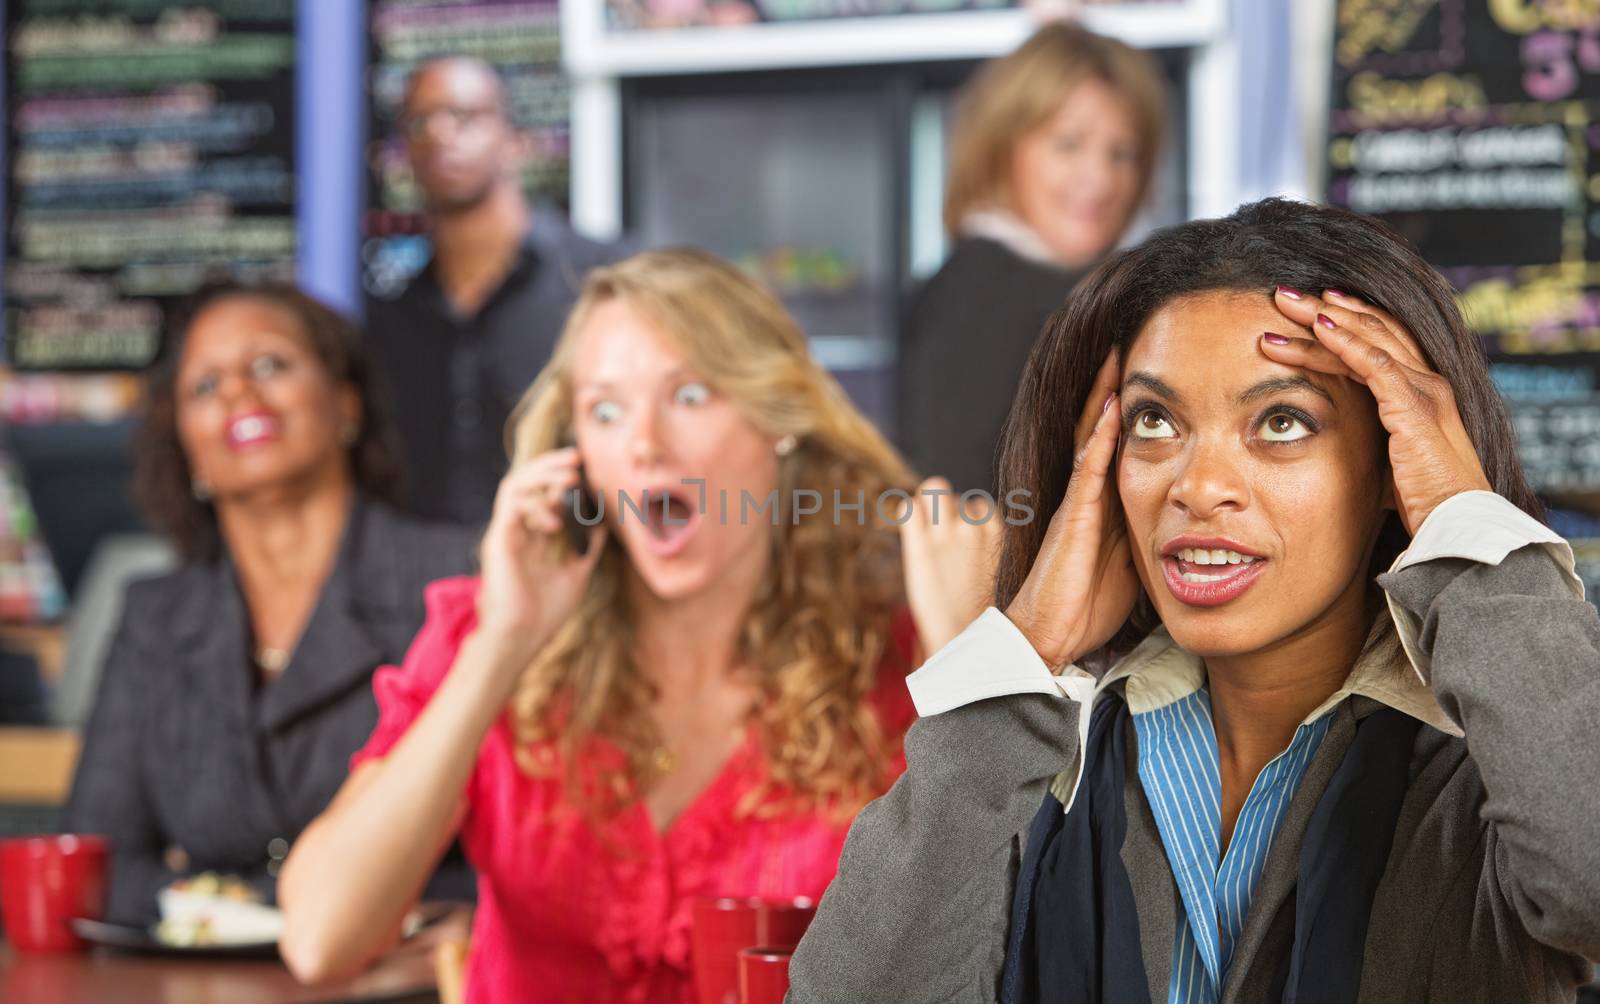 Annoyed lady listening to obnoxious woman on phone